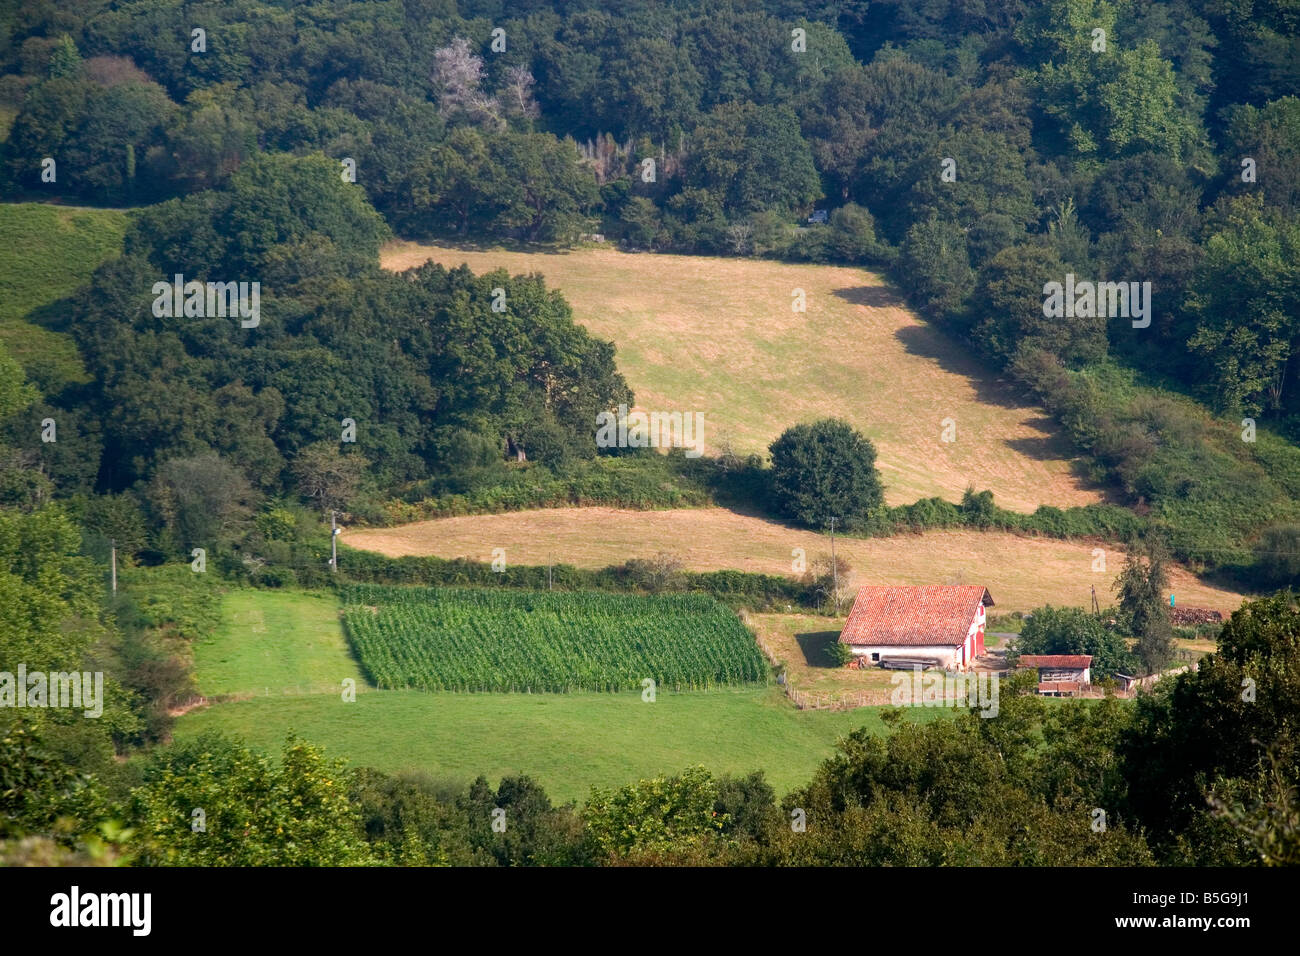 Rural farmland in the Pyrenees Atlantiques department of French Basque Country Southwest France Stock Photo